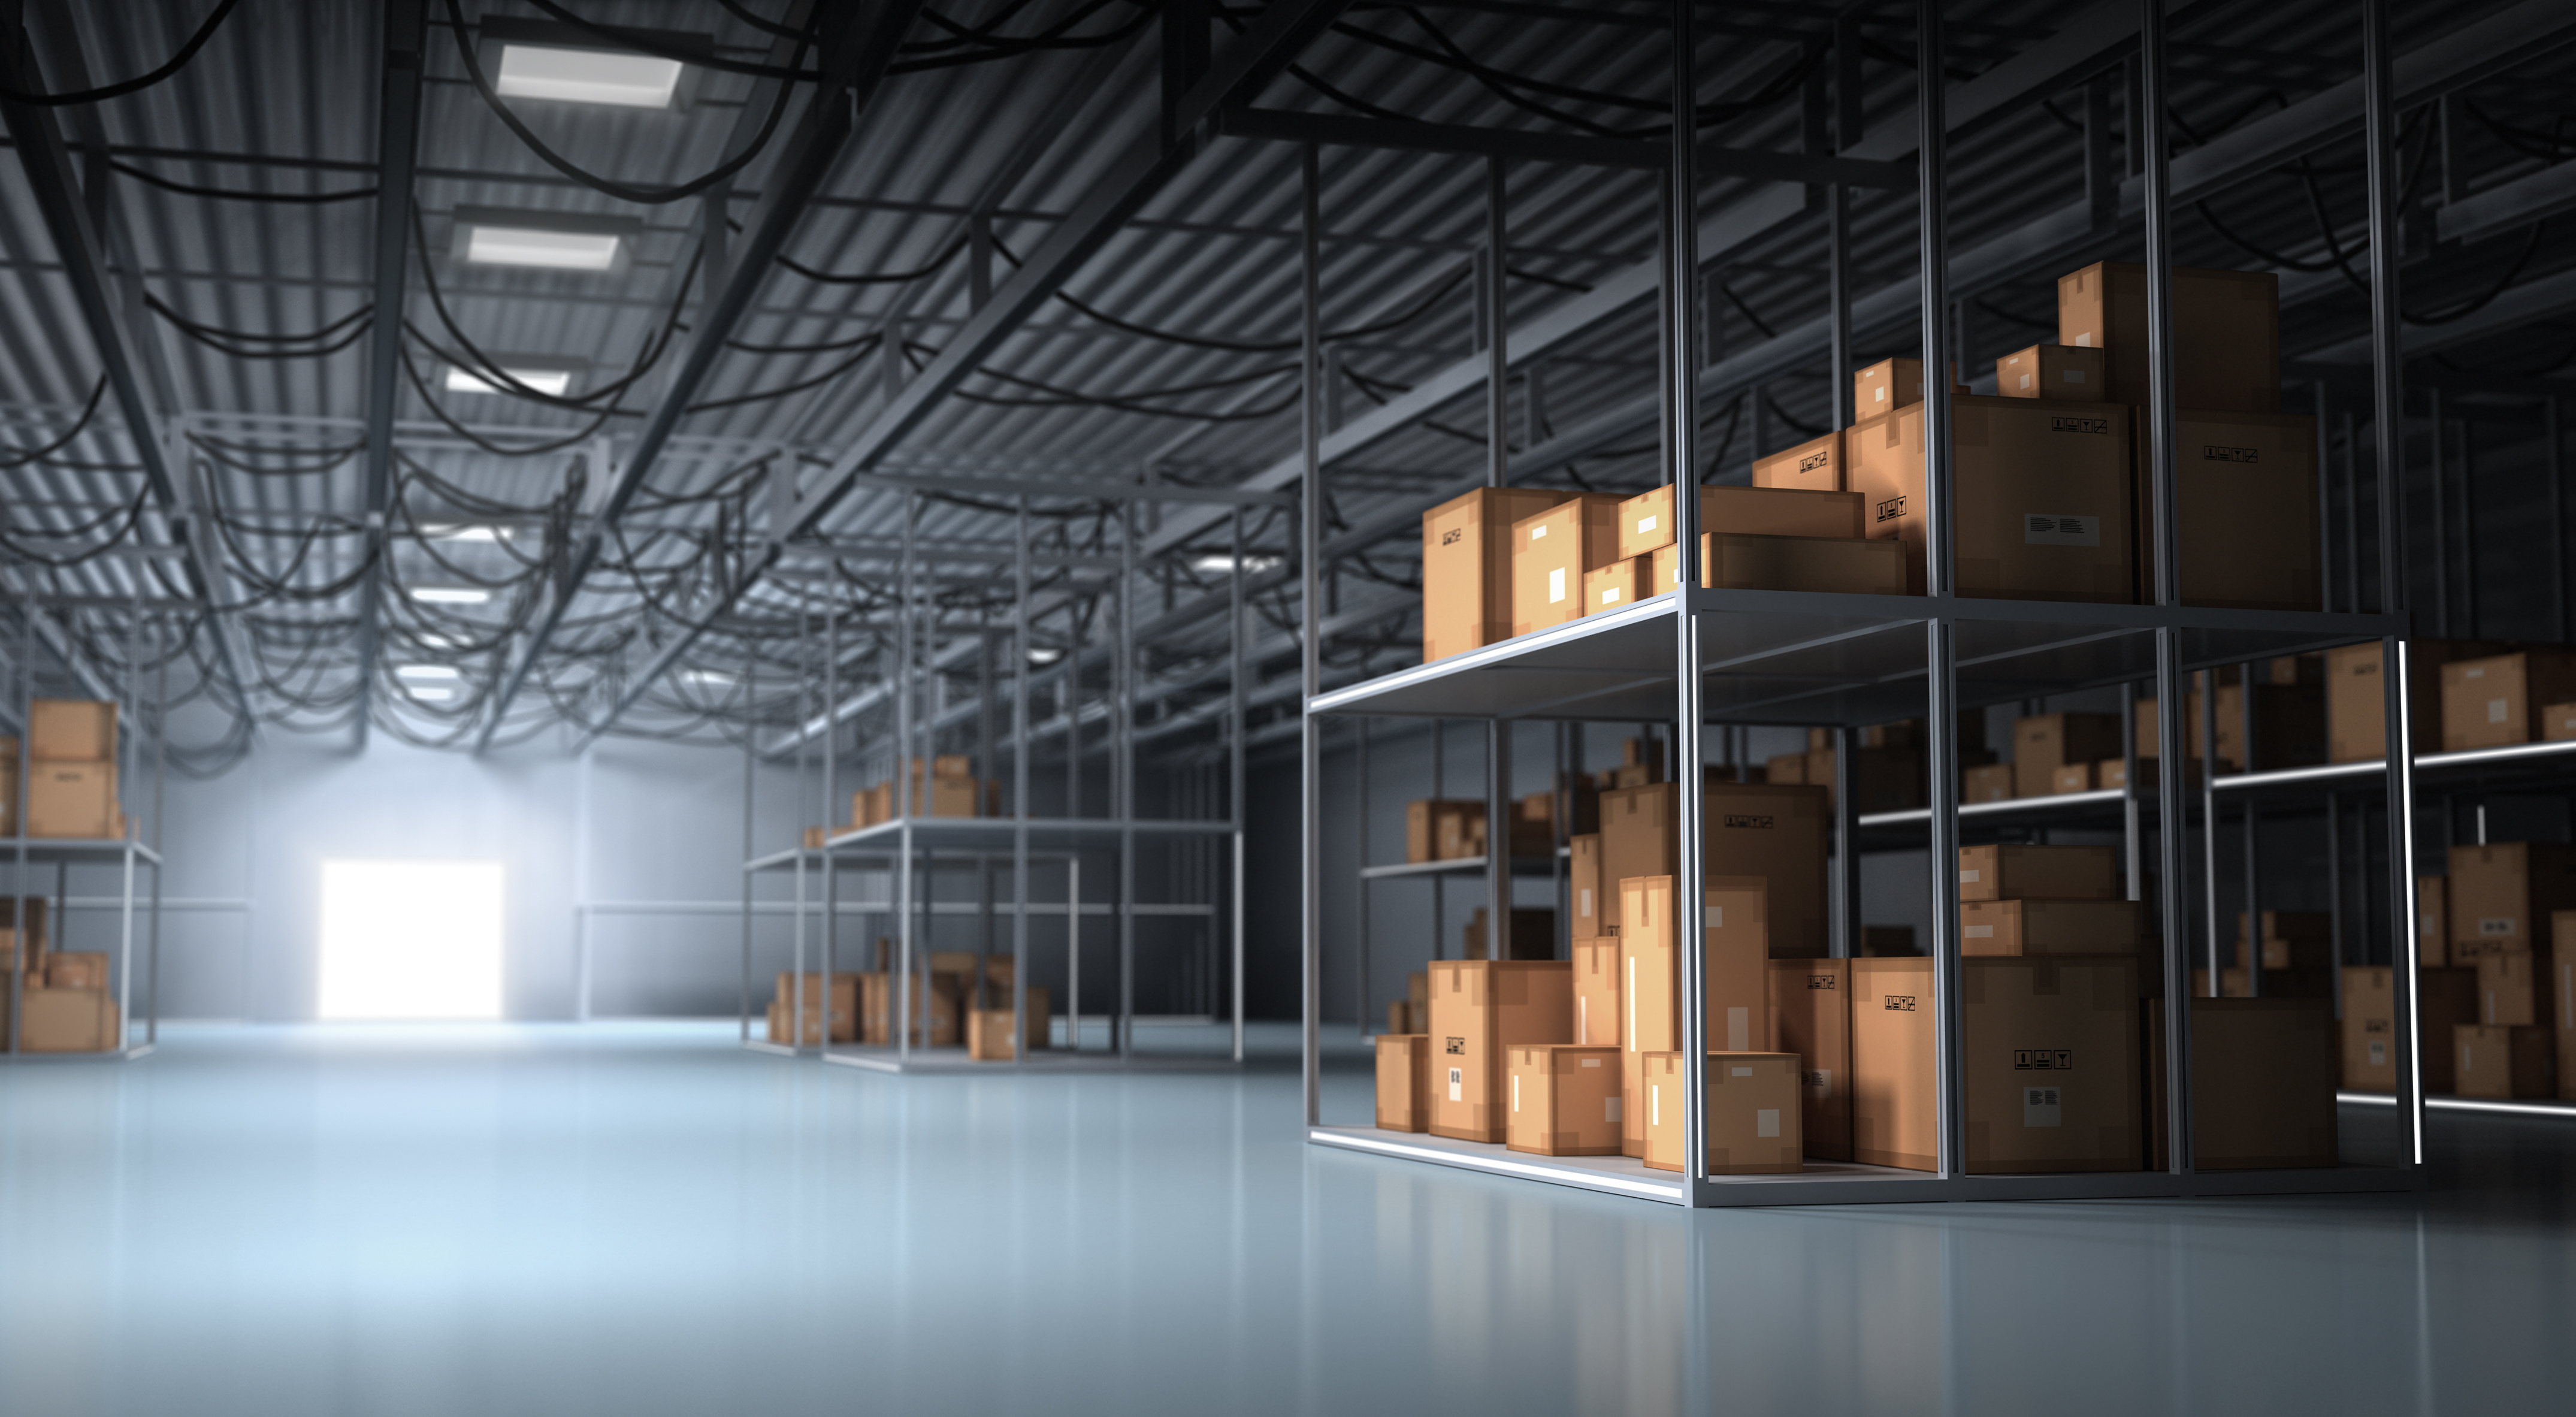 Warehouse and Boxes - 3D Rendering